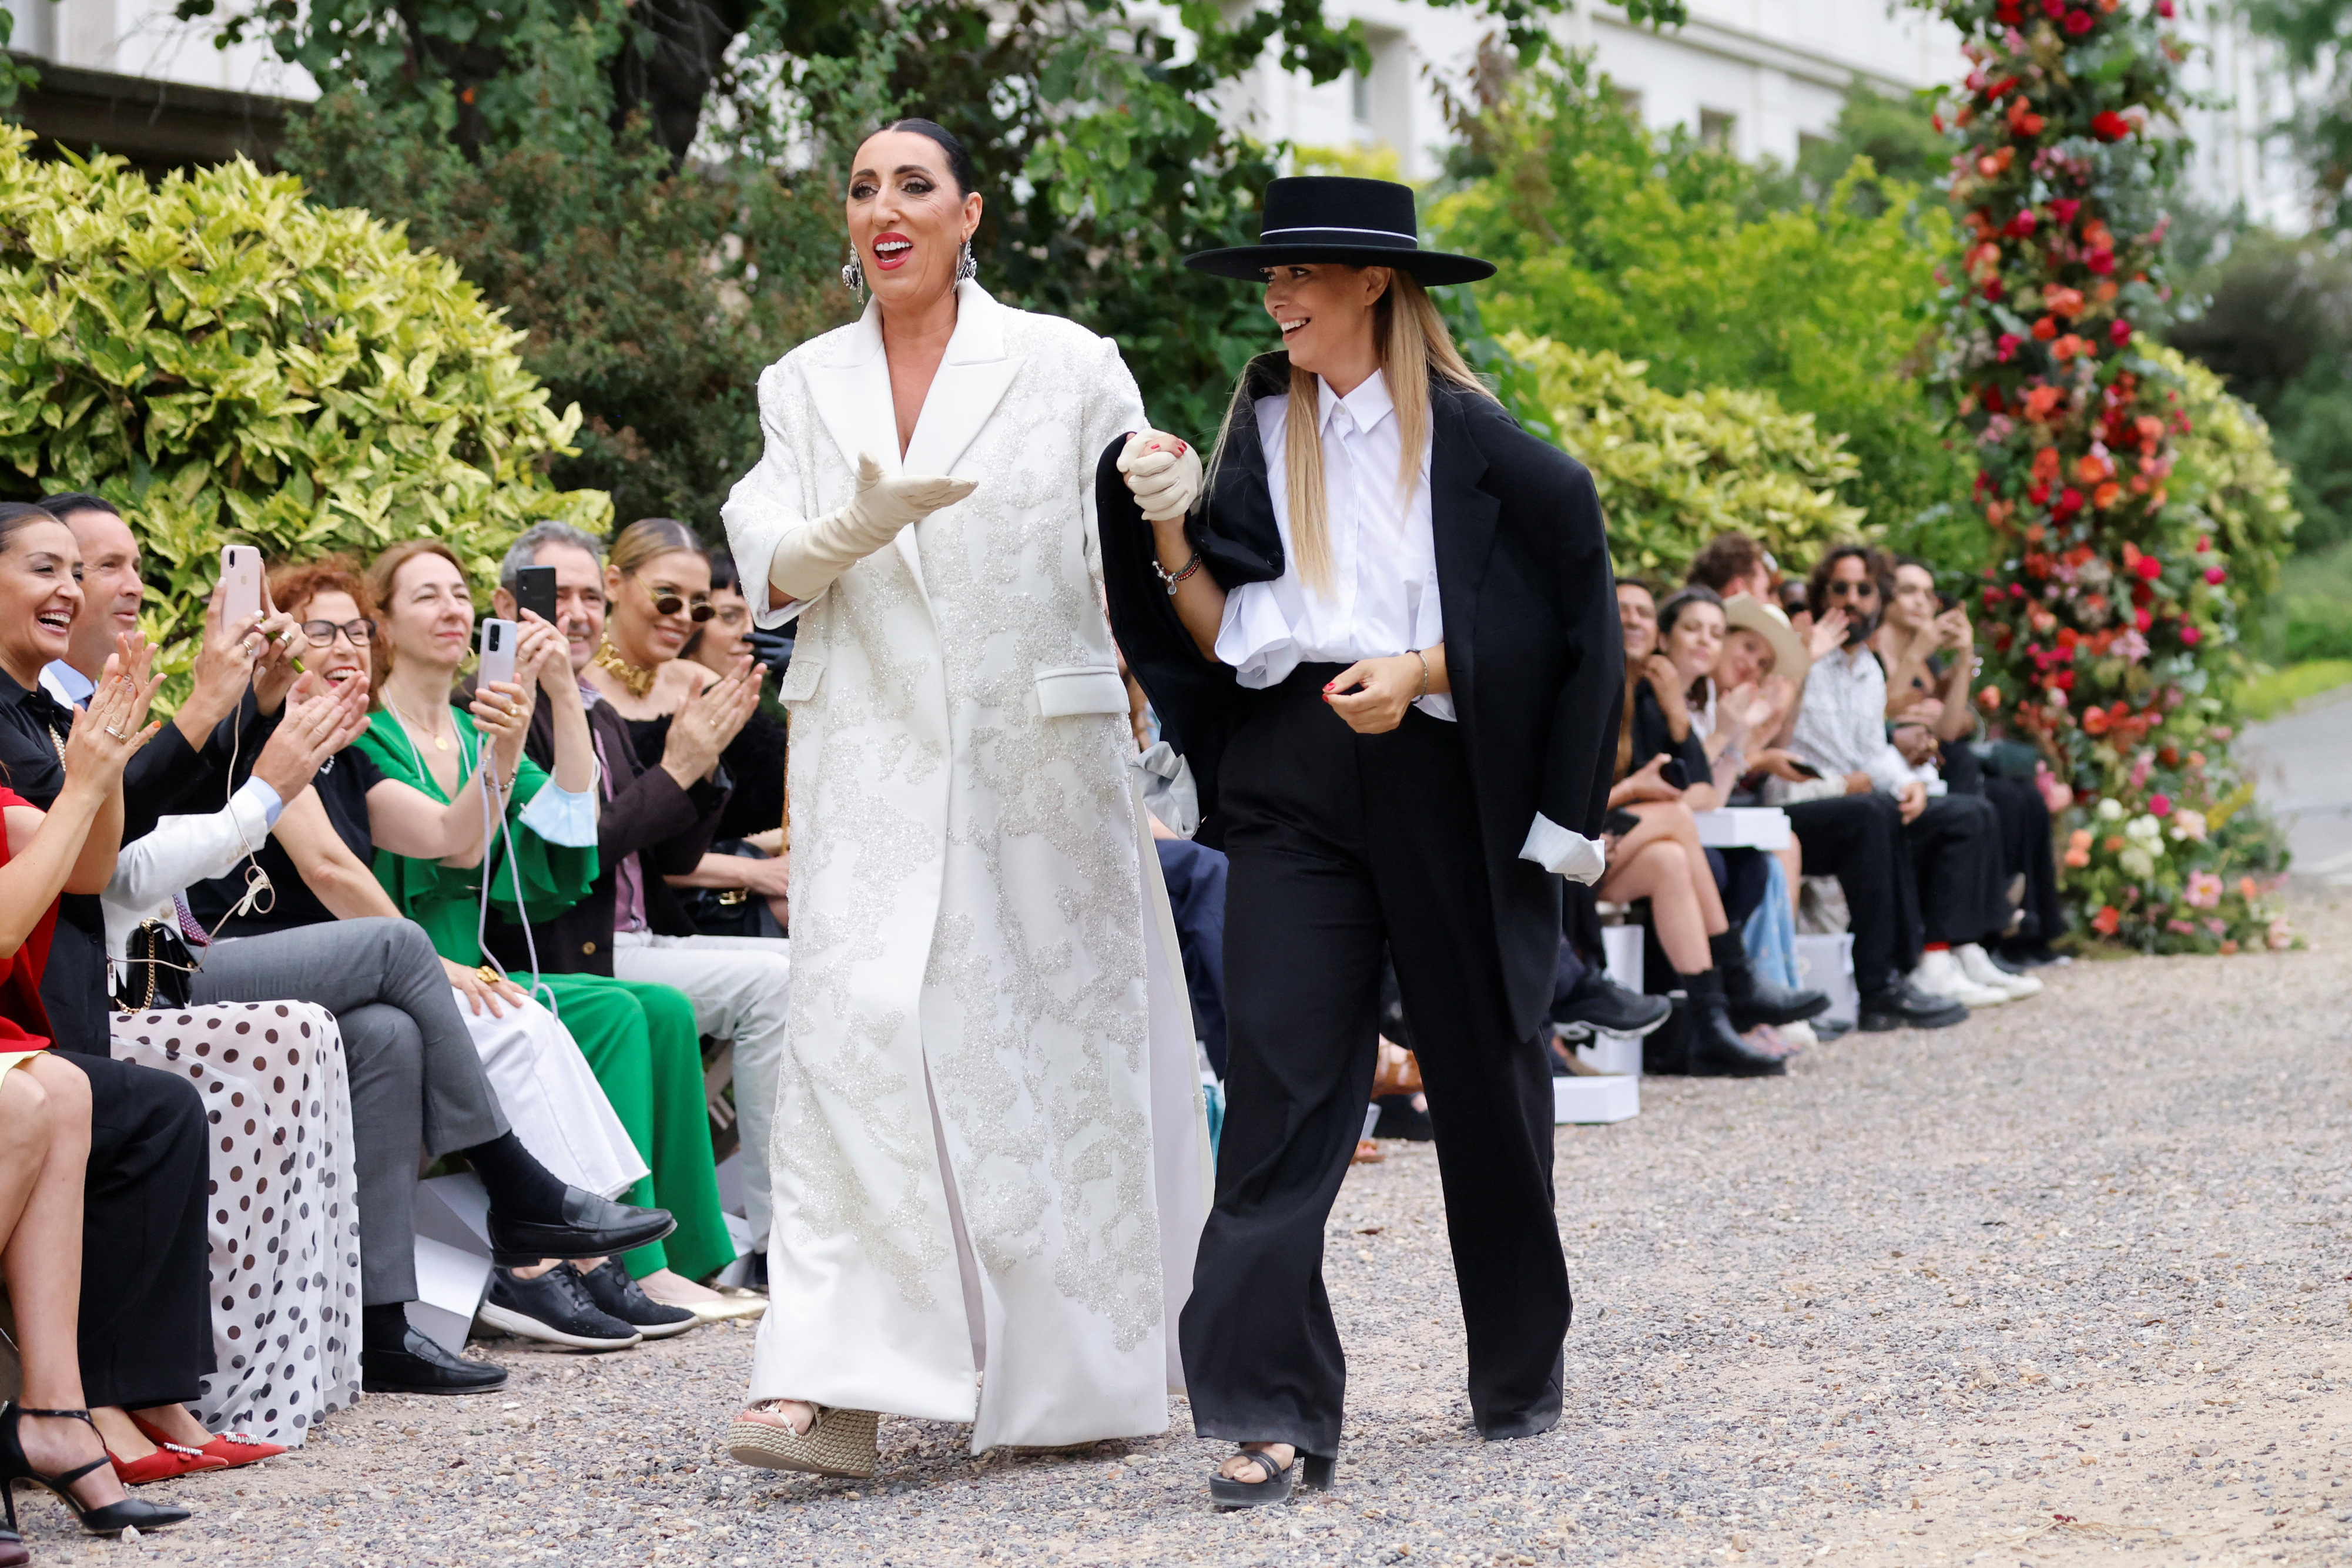 Record Breaking Fashion Auction for a Balenciaga couture ivory